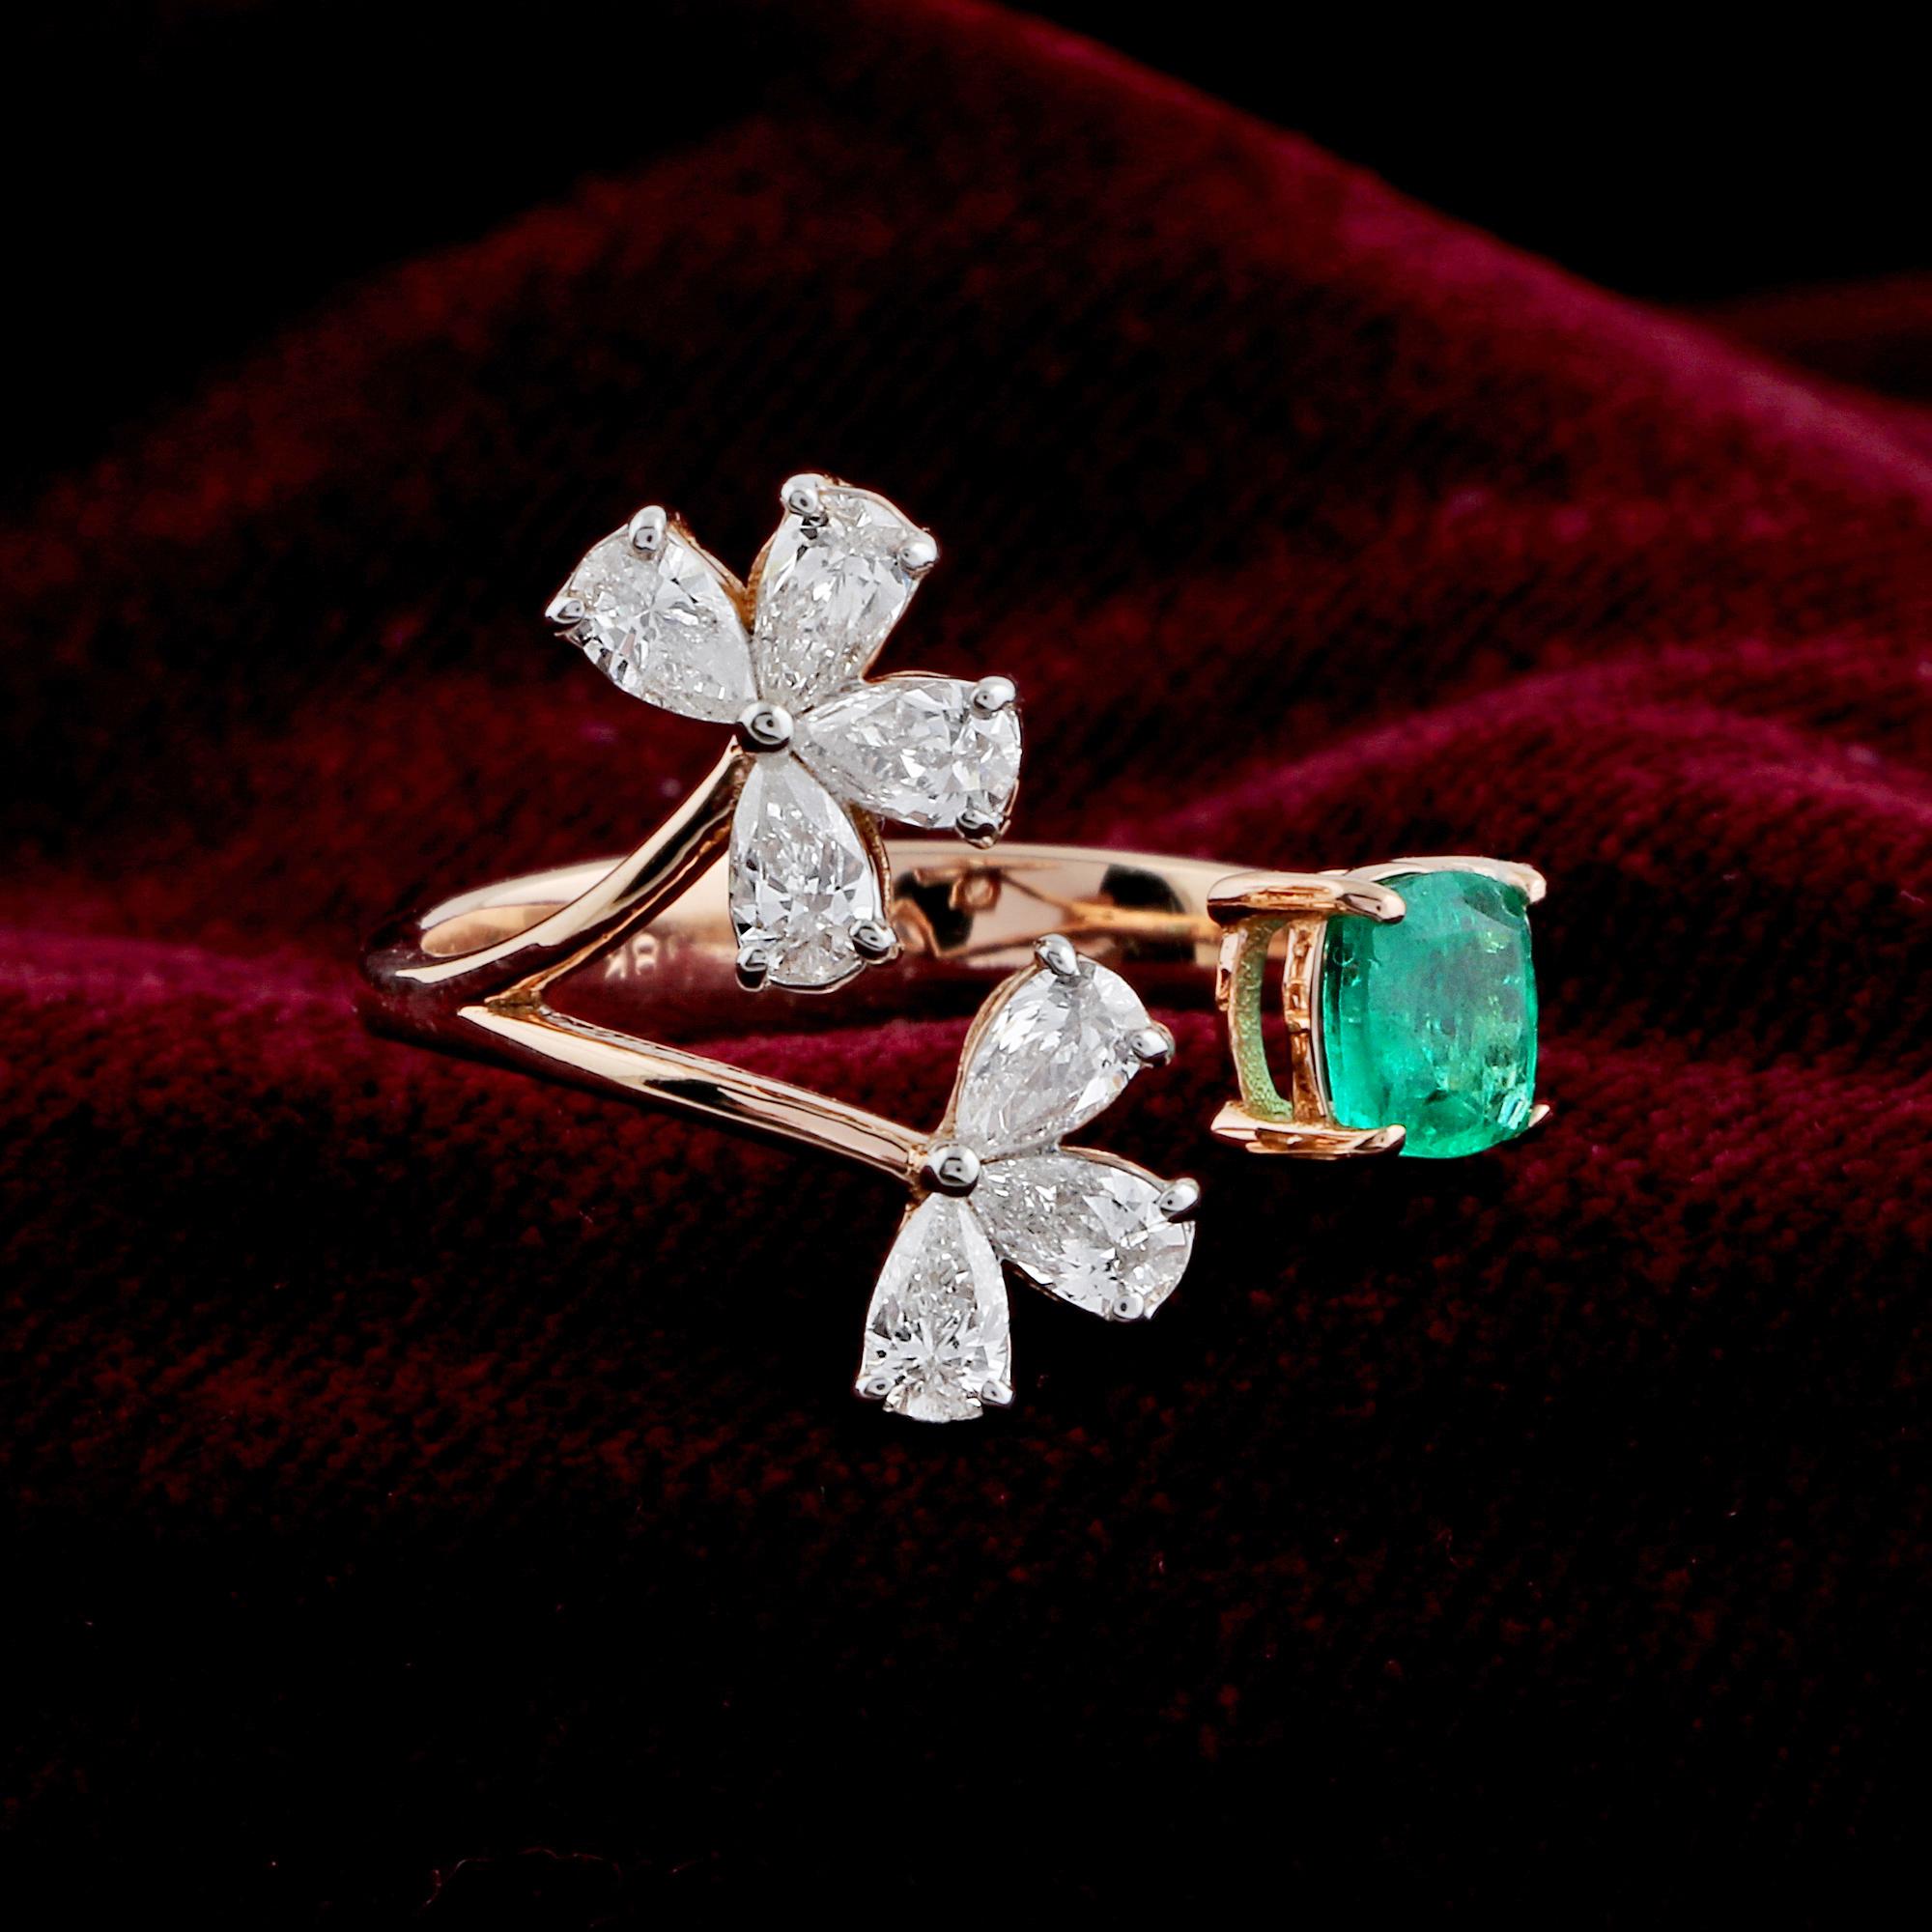 For Sale:  Natural Emerald Gemstone Cuff Ring Pear Diamond Solid 18k Rose Gold Fine Jewelry 4